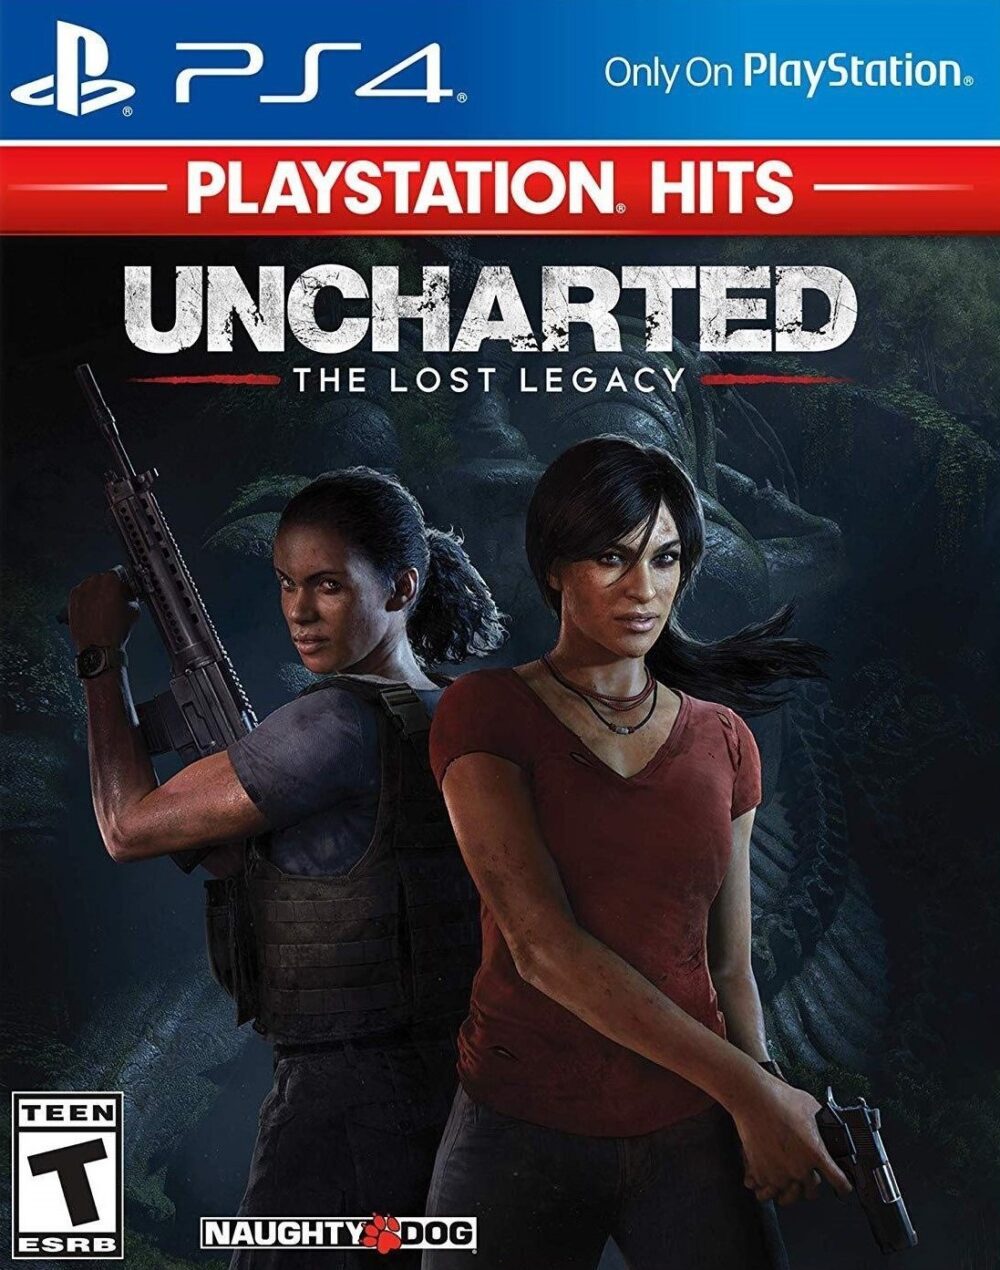 Uncharted: The Lost Legacy (PlayStation Hits) for PS4